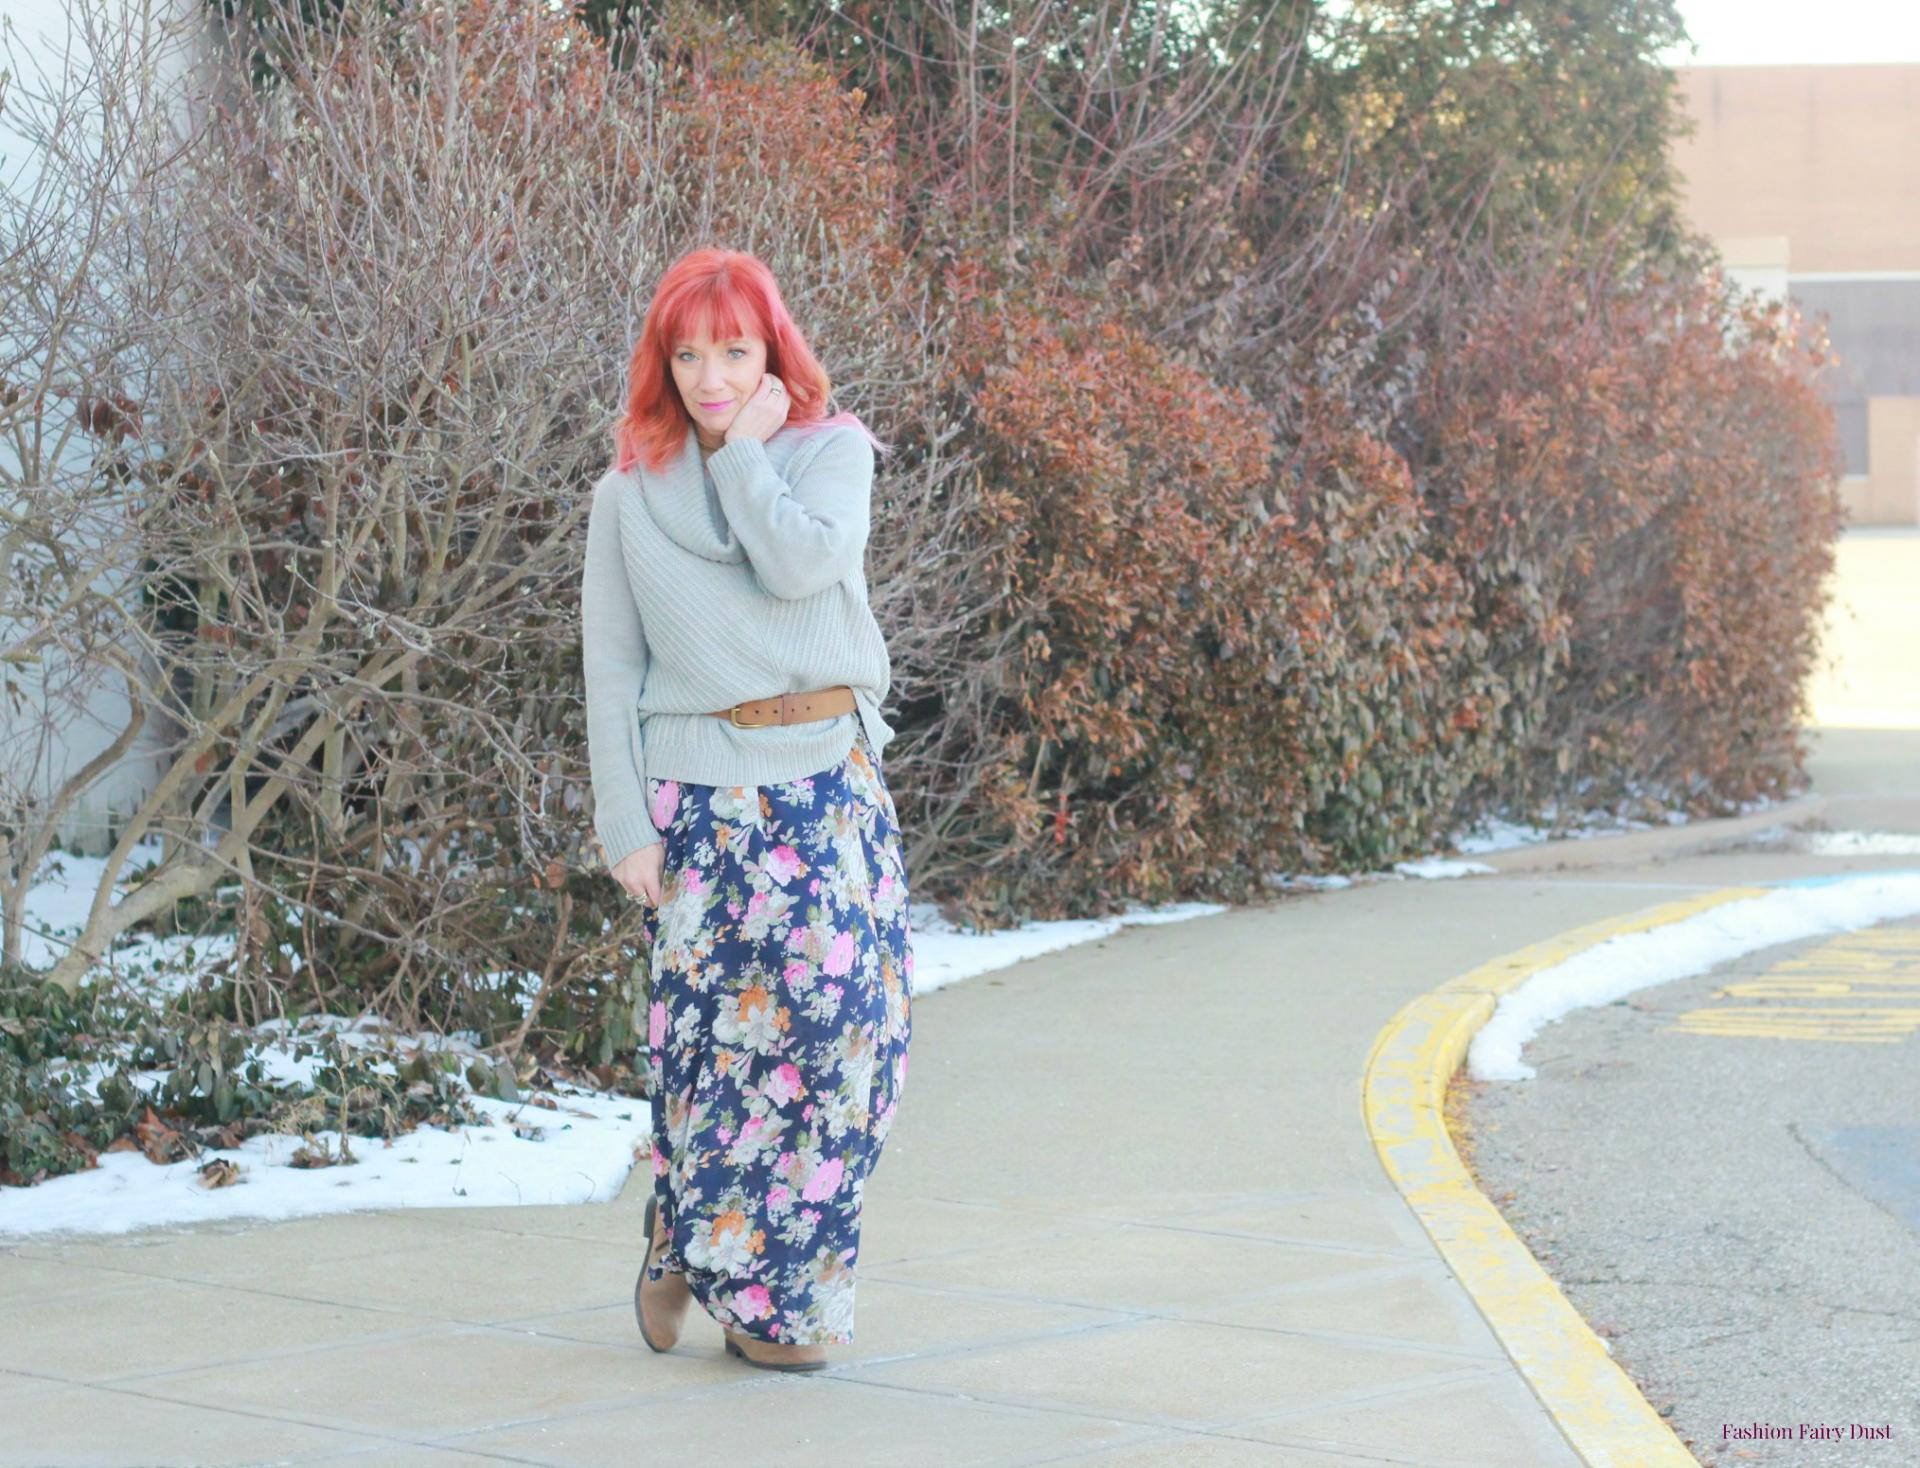 Floral maxi dress, gray sweater and Birkenstock boots.